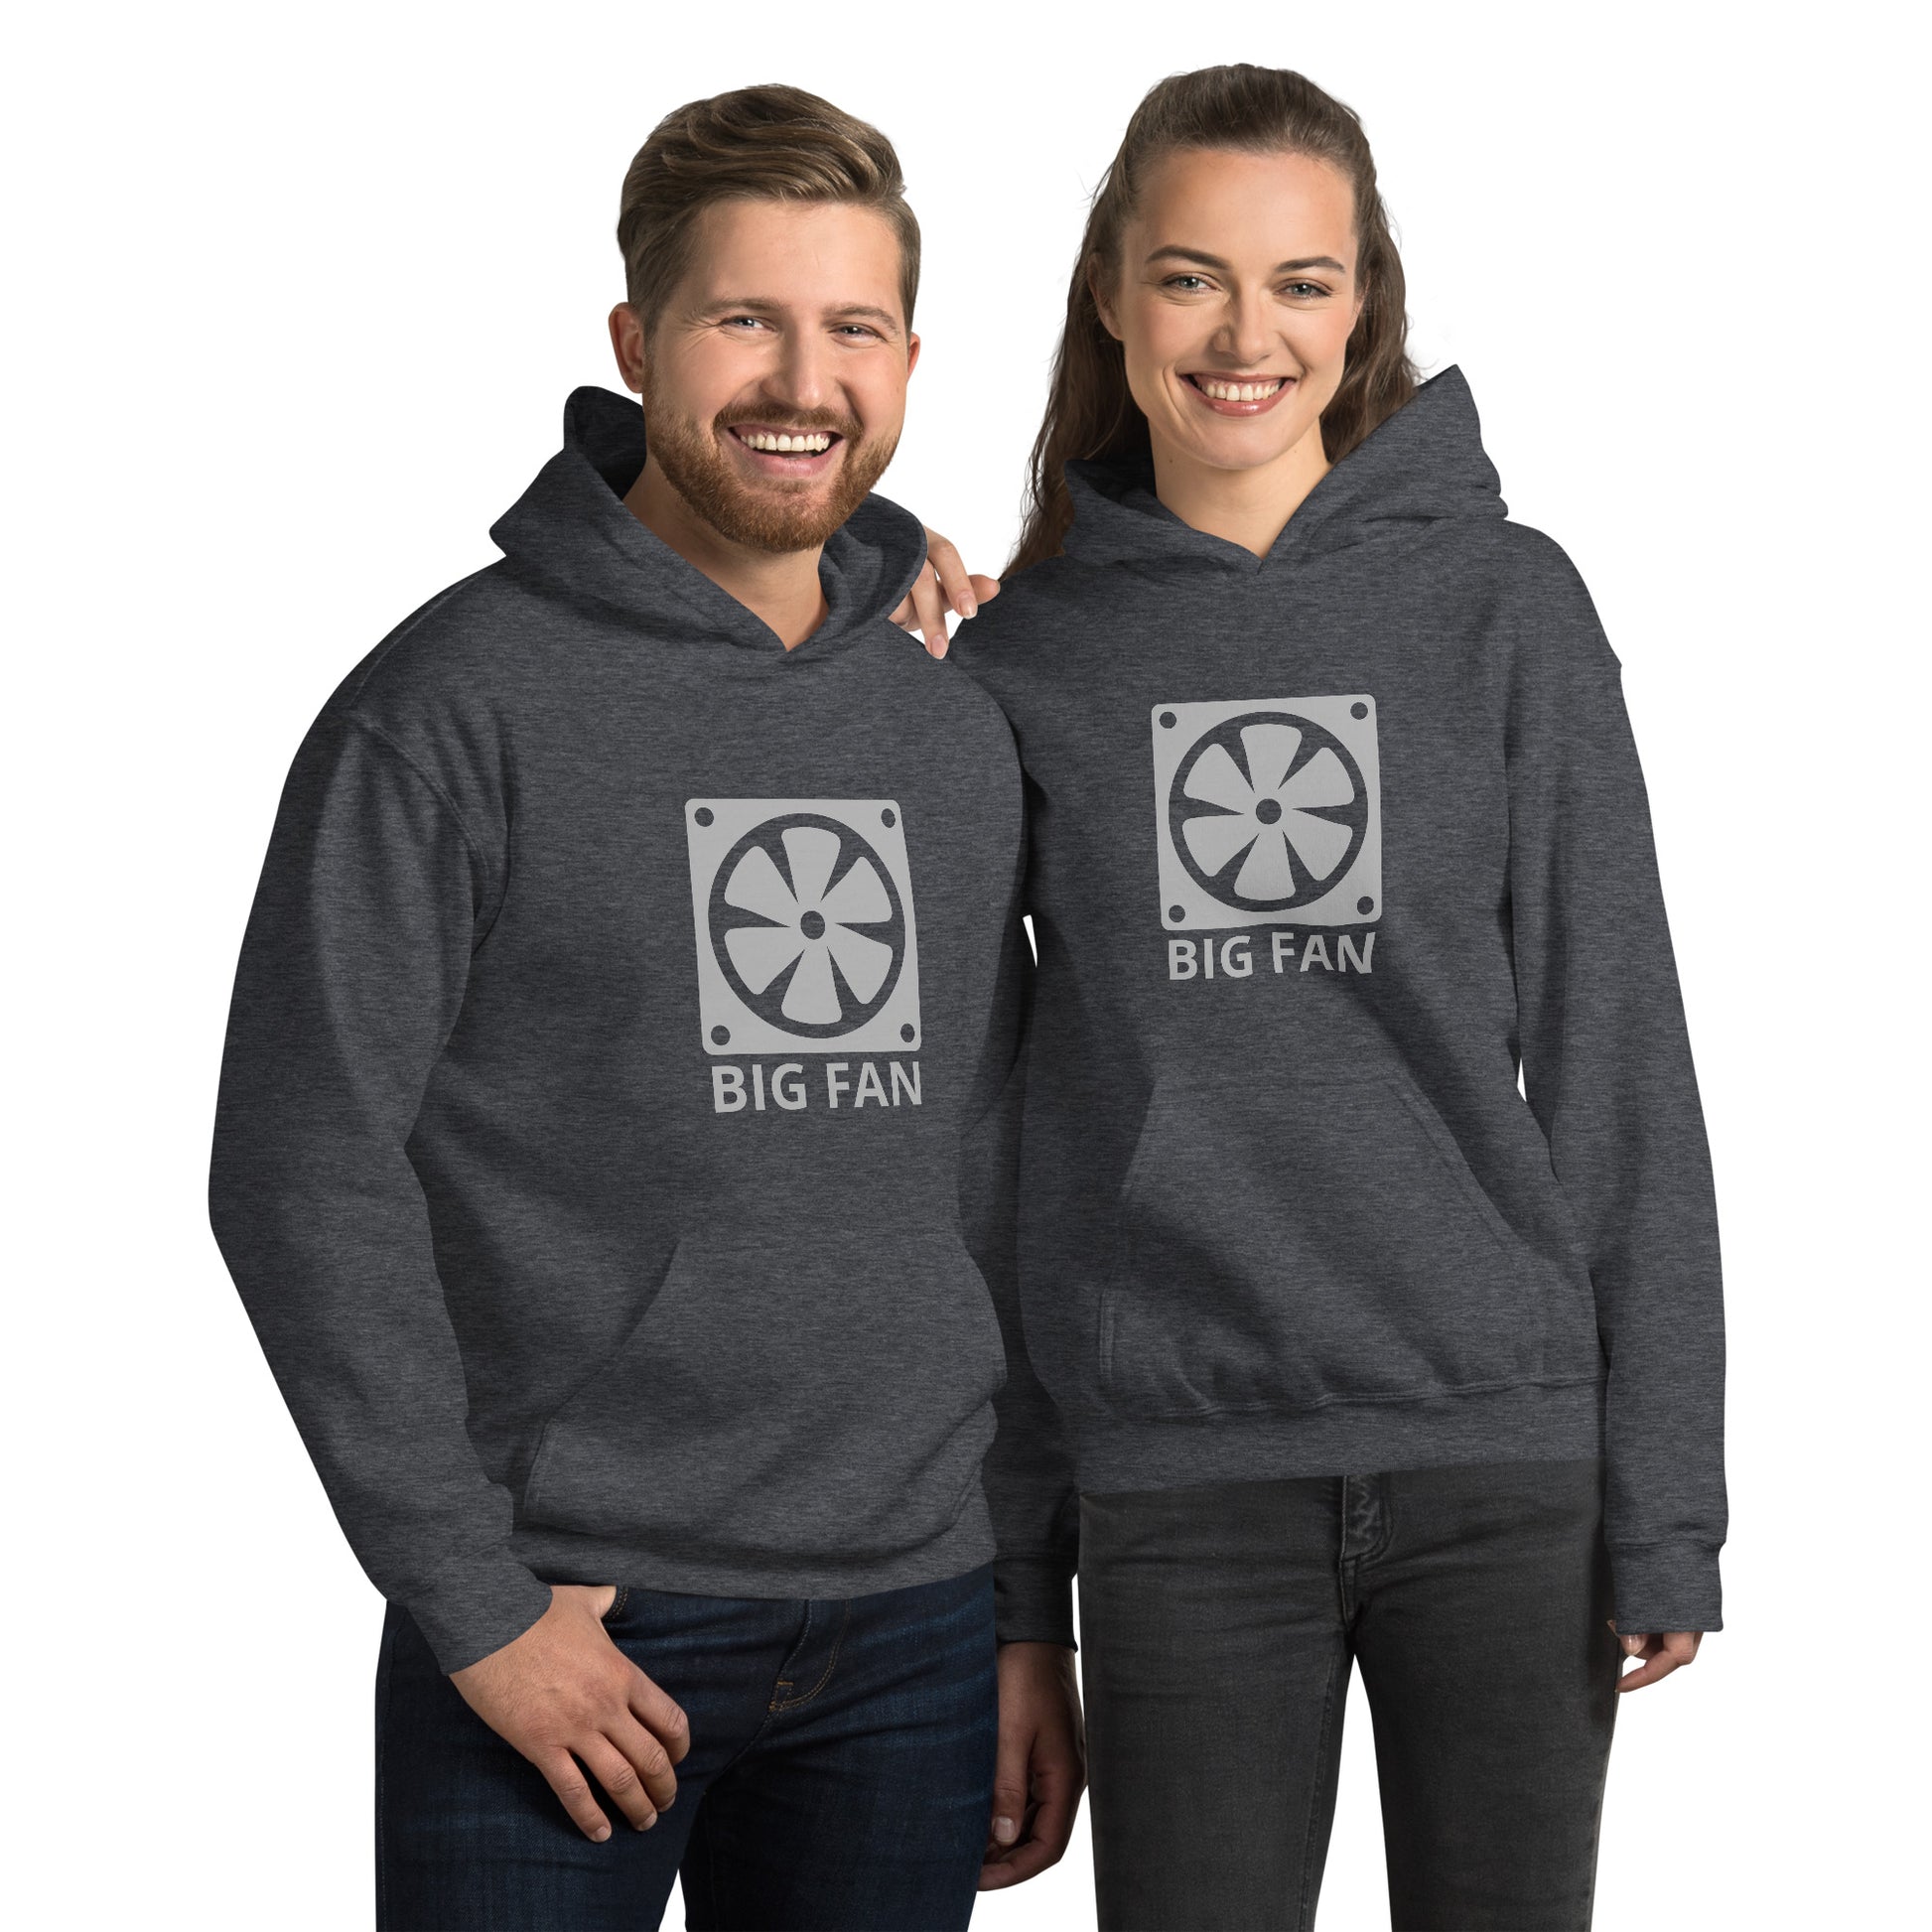 Man and women with dark grey hoodie with image of a big computer fan and the text "BIG FAN"